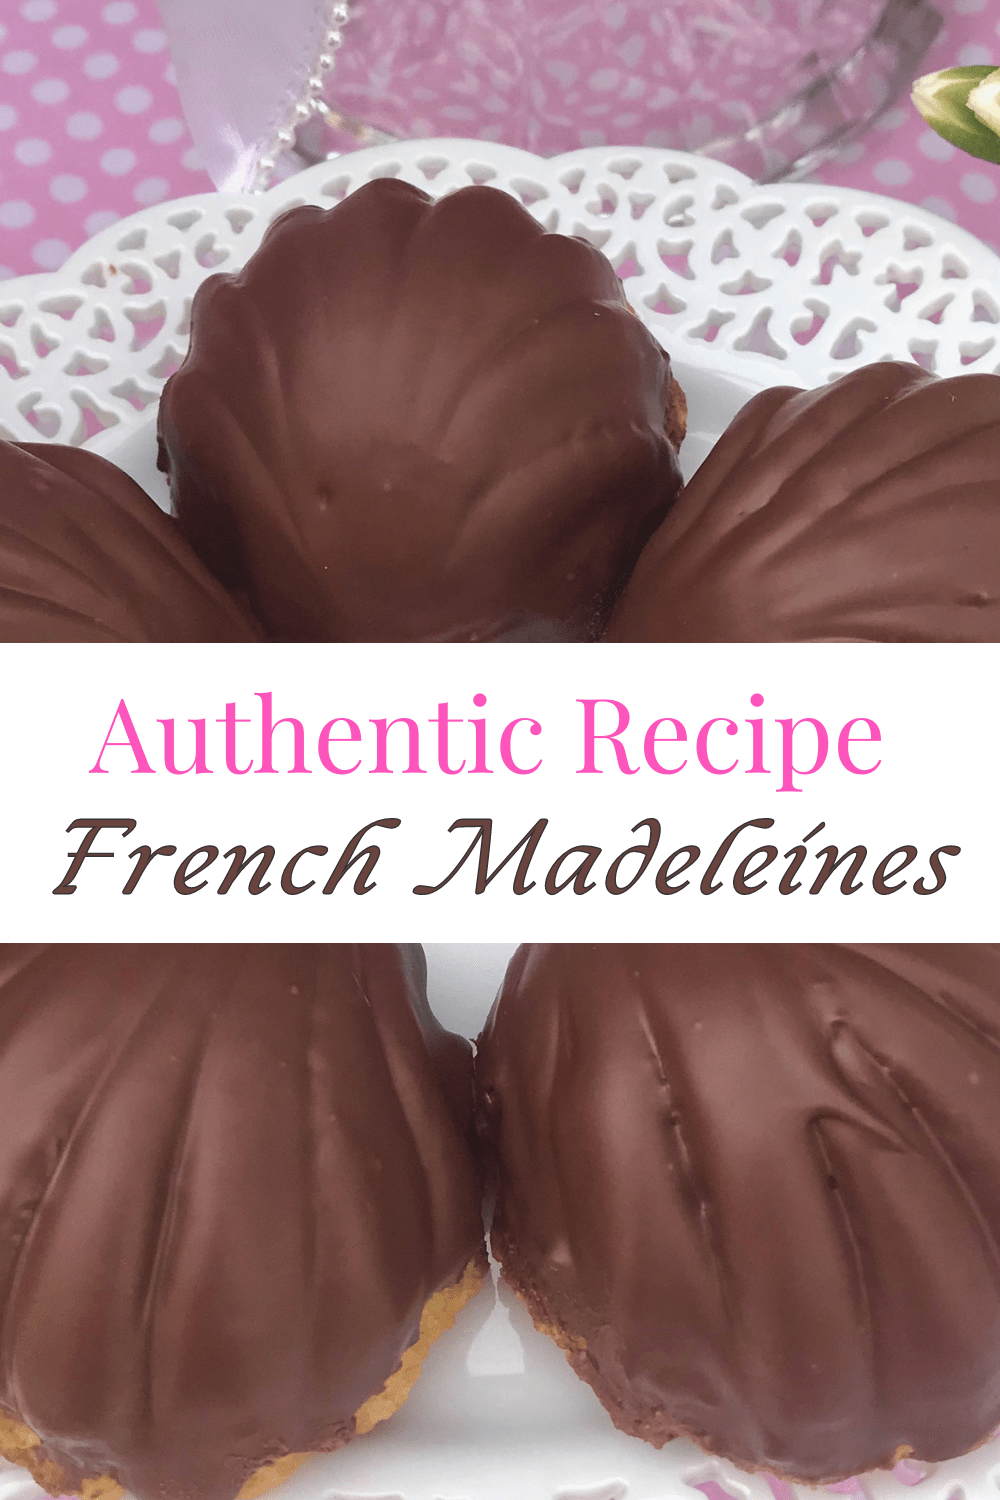 Authentic recipe for dark chocolate dipped French Madeleines